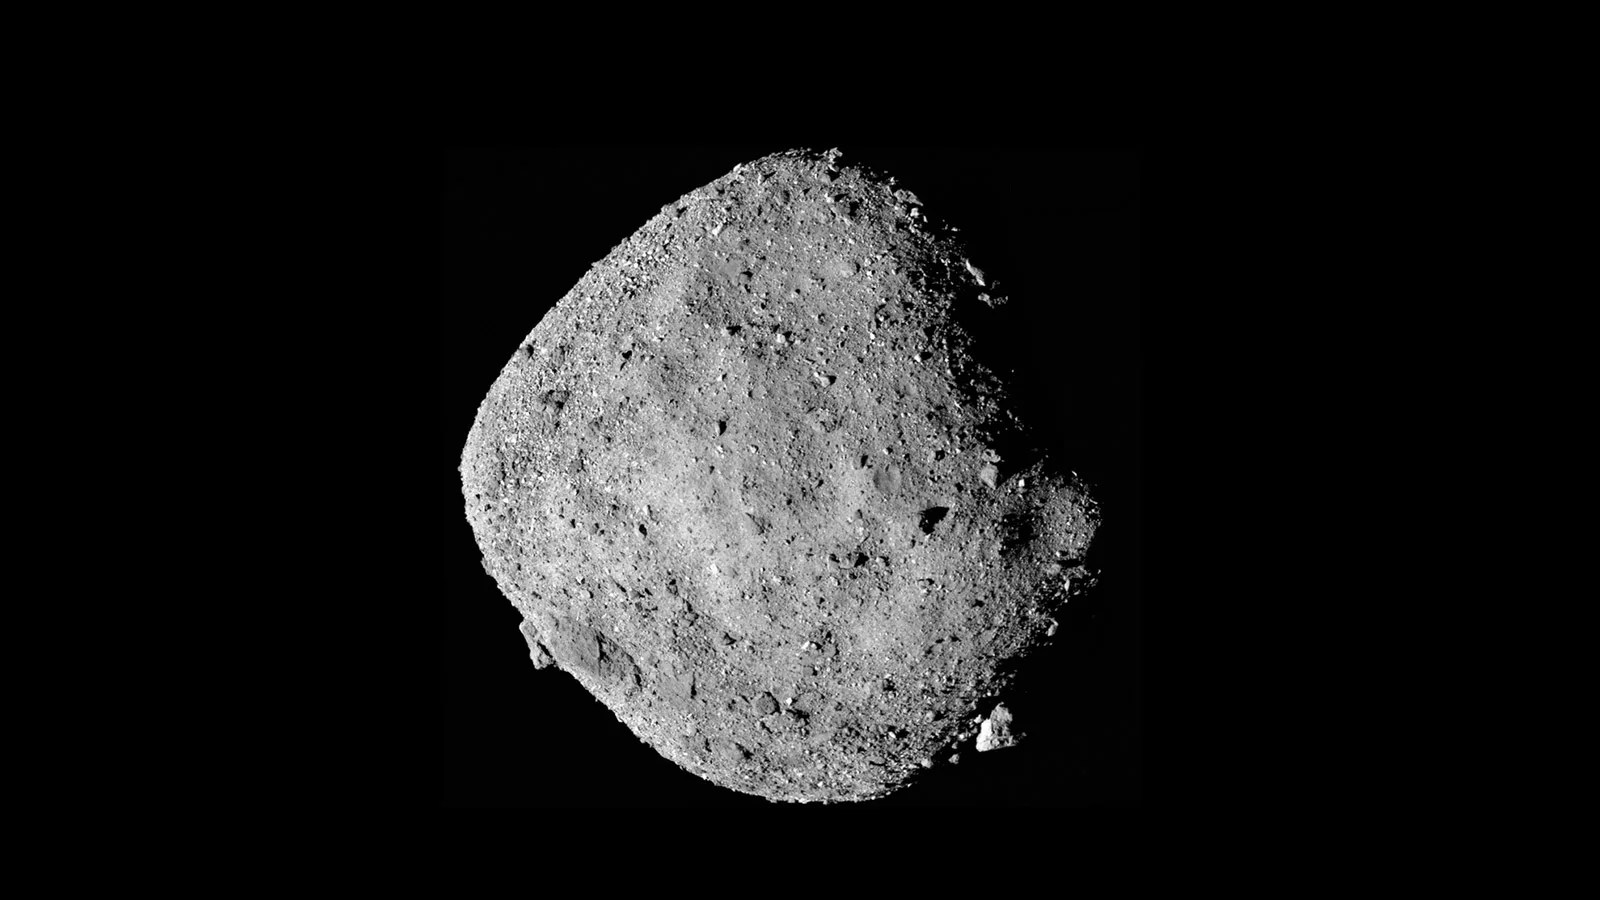 A full disc view of Bennu, whoing its surface littered with giant boulders.